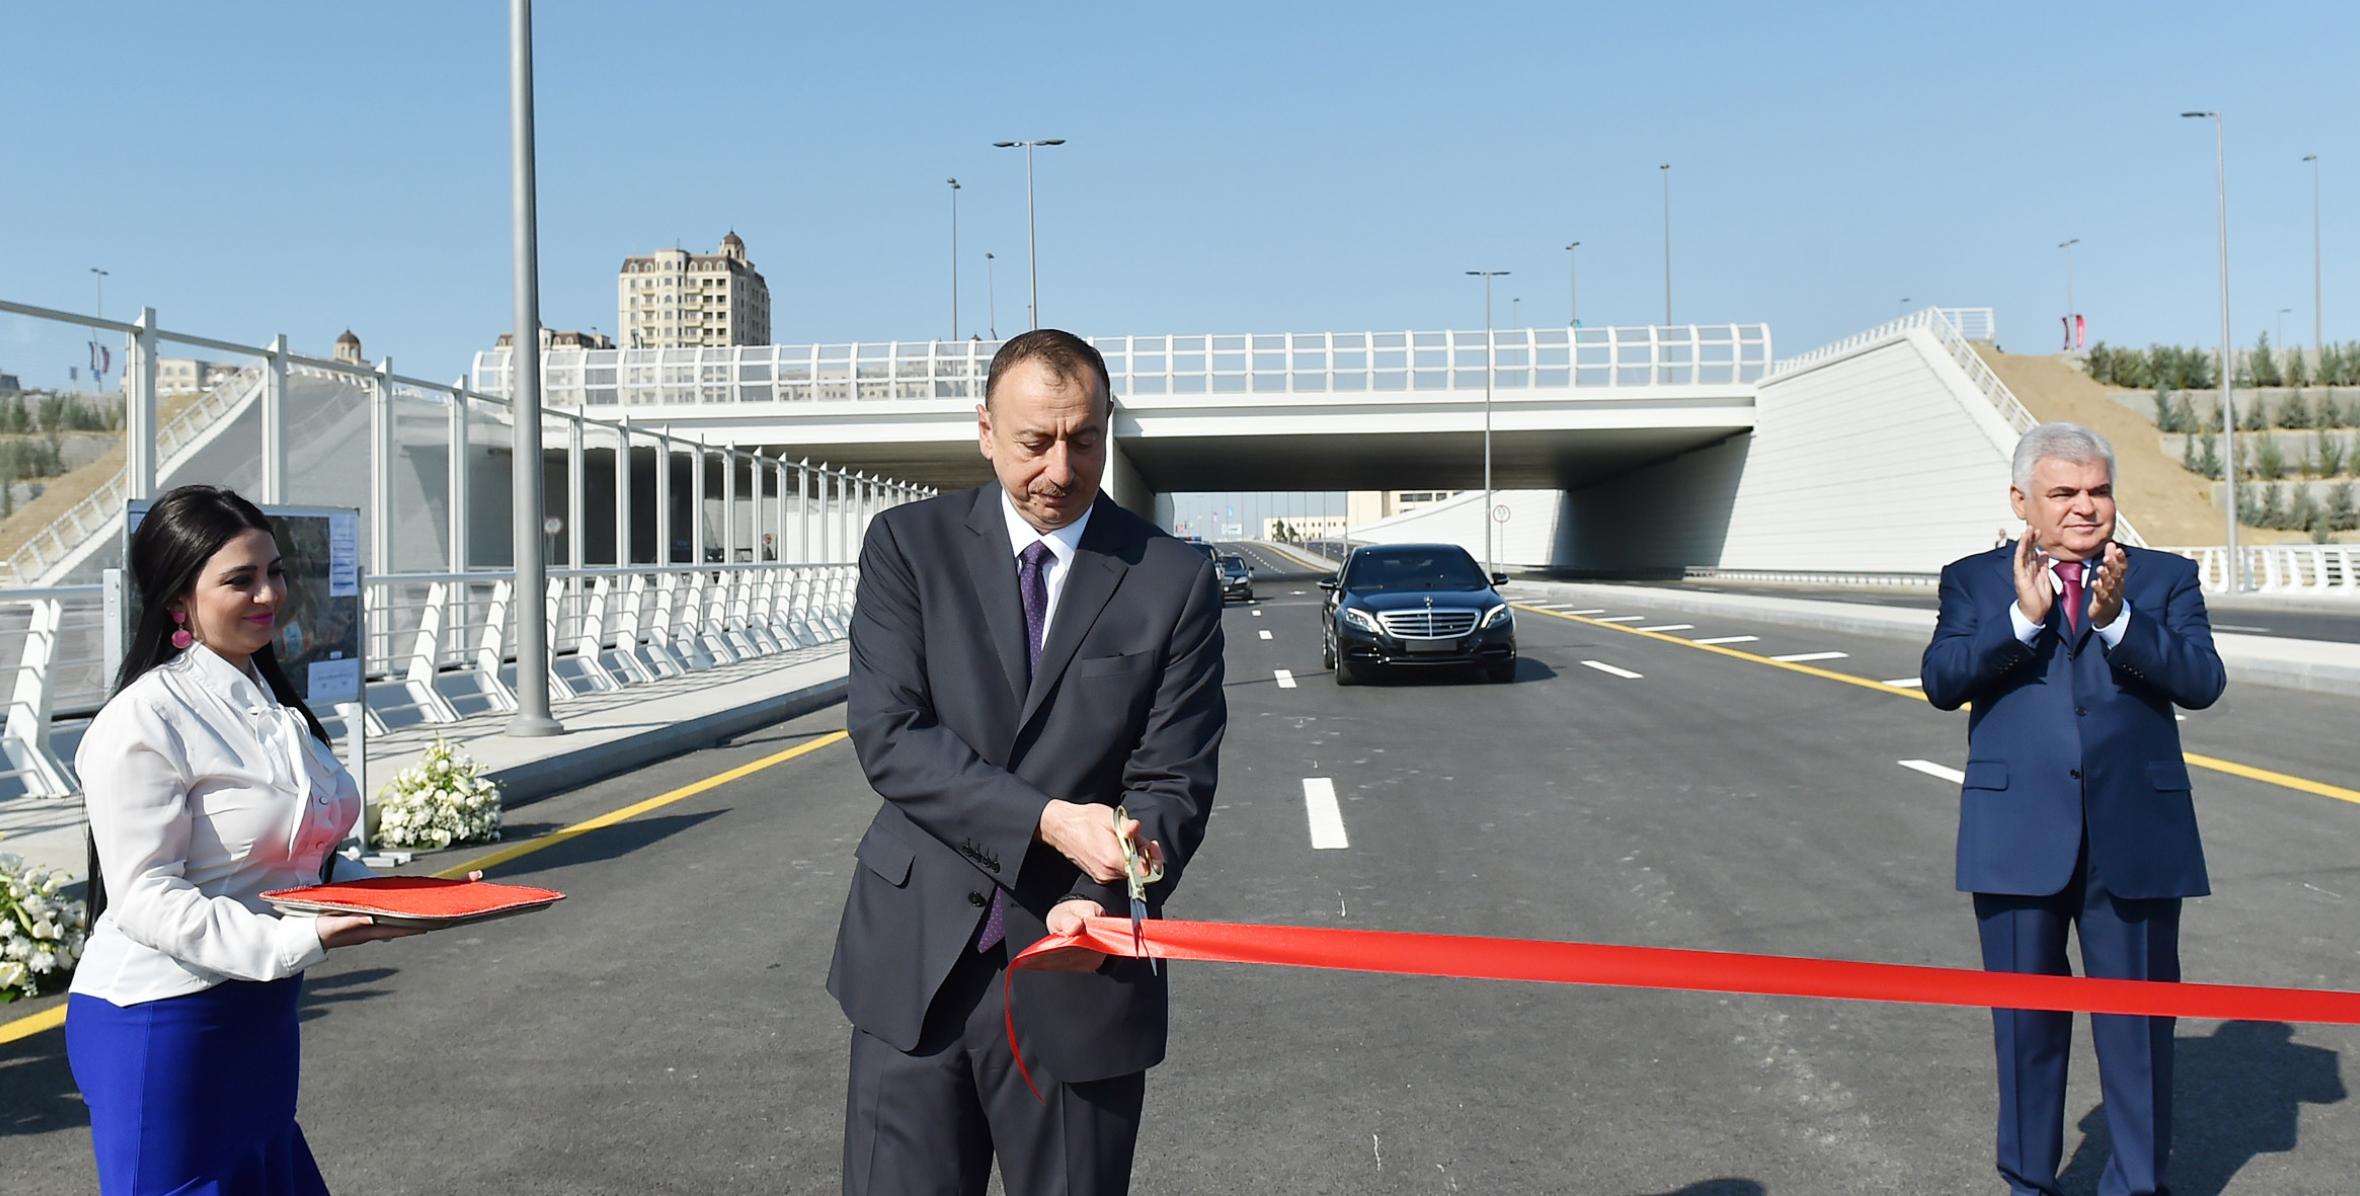 Ilham Aliyev attended the opening of the road and transport infrastructure built around the Baku Olympic Stadium